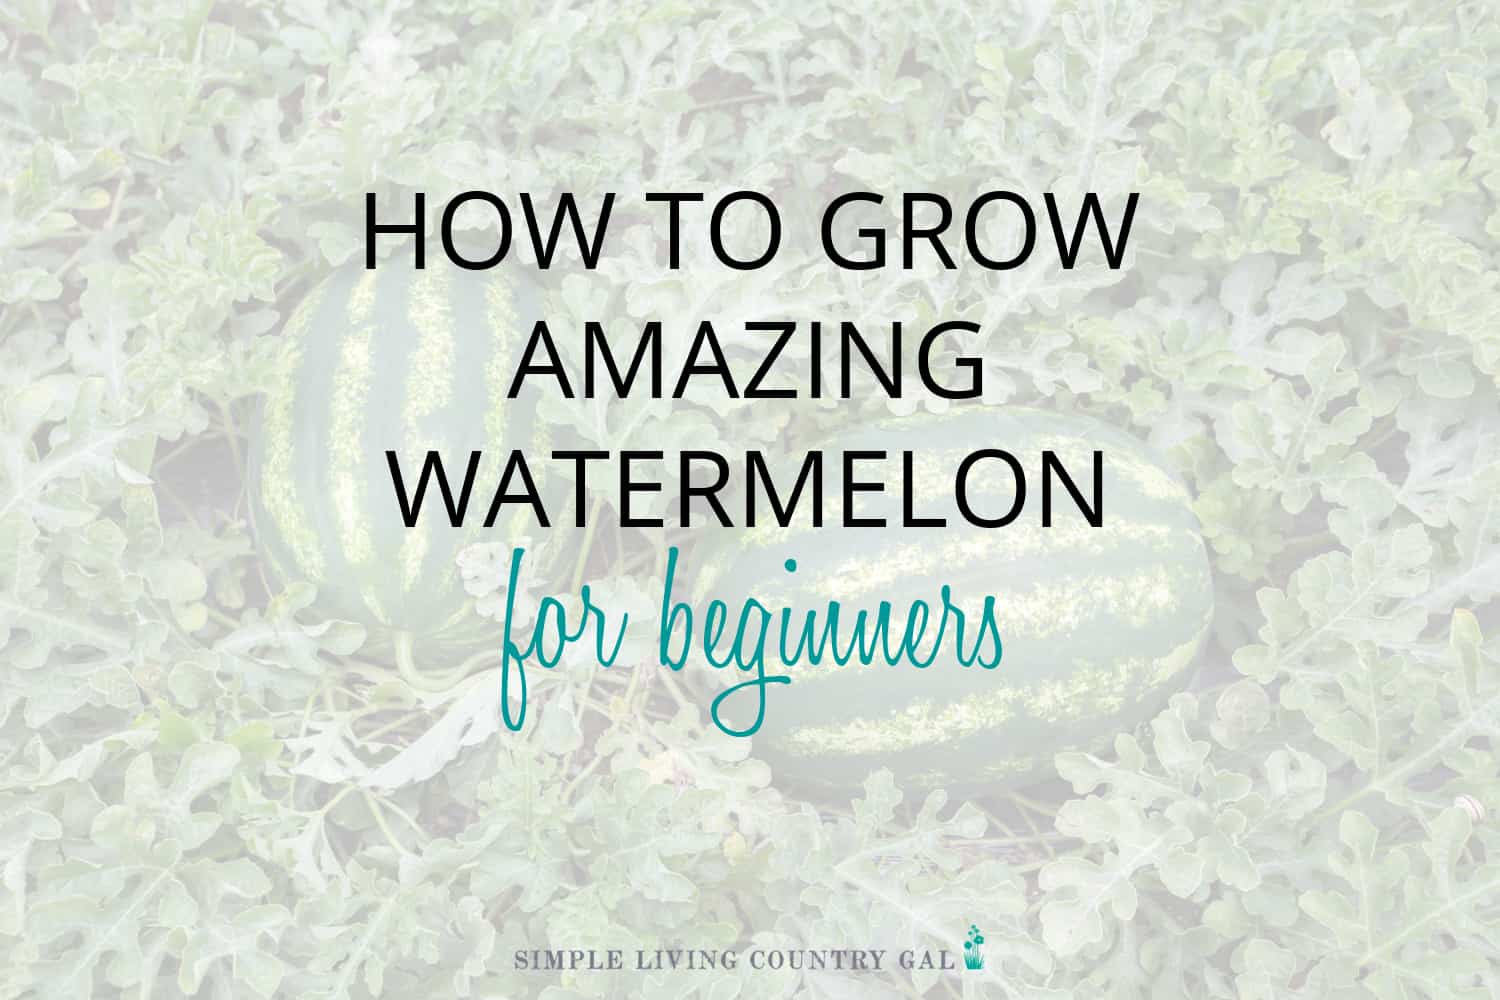 How to Grow Watermelon for Beginners